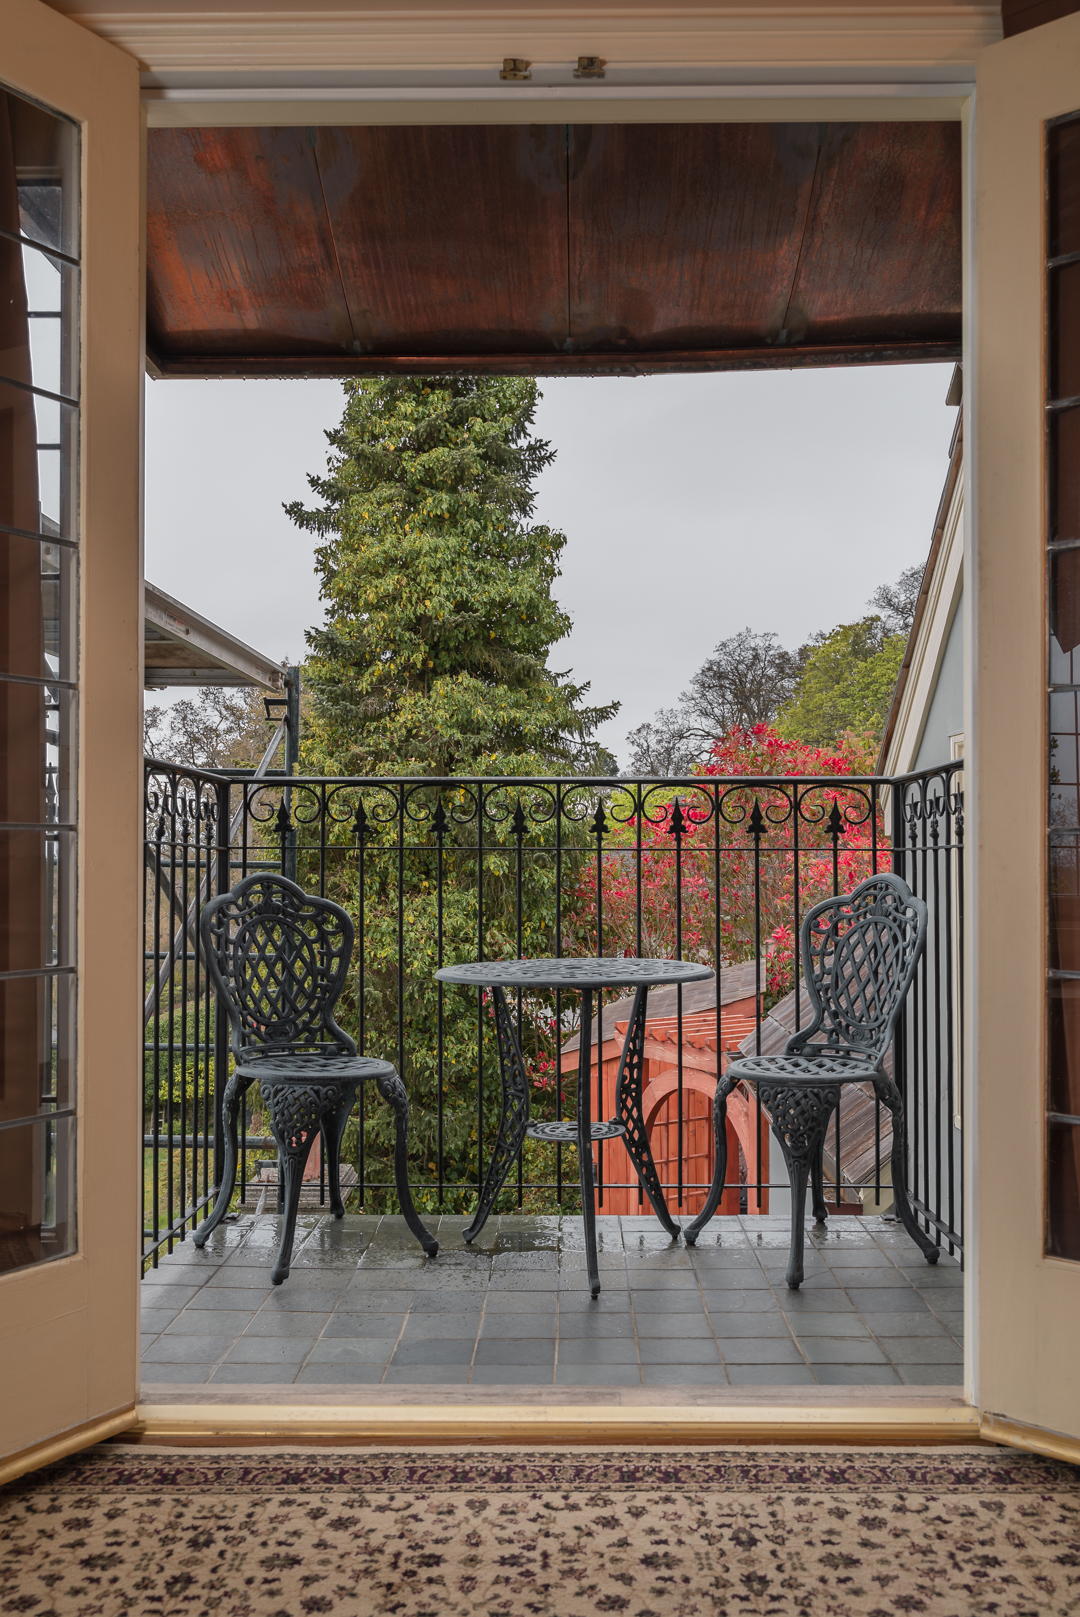 Balcony with wrought iron table, chairs, and railing